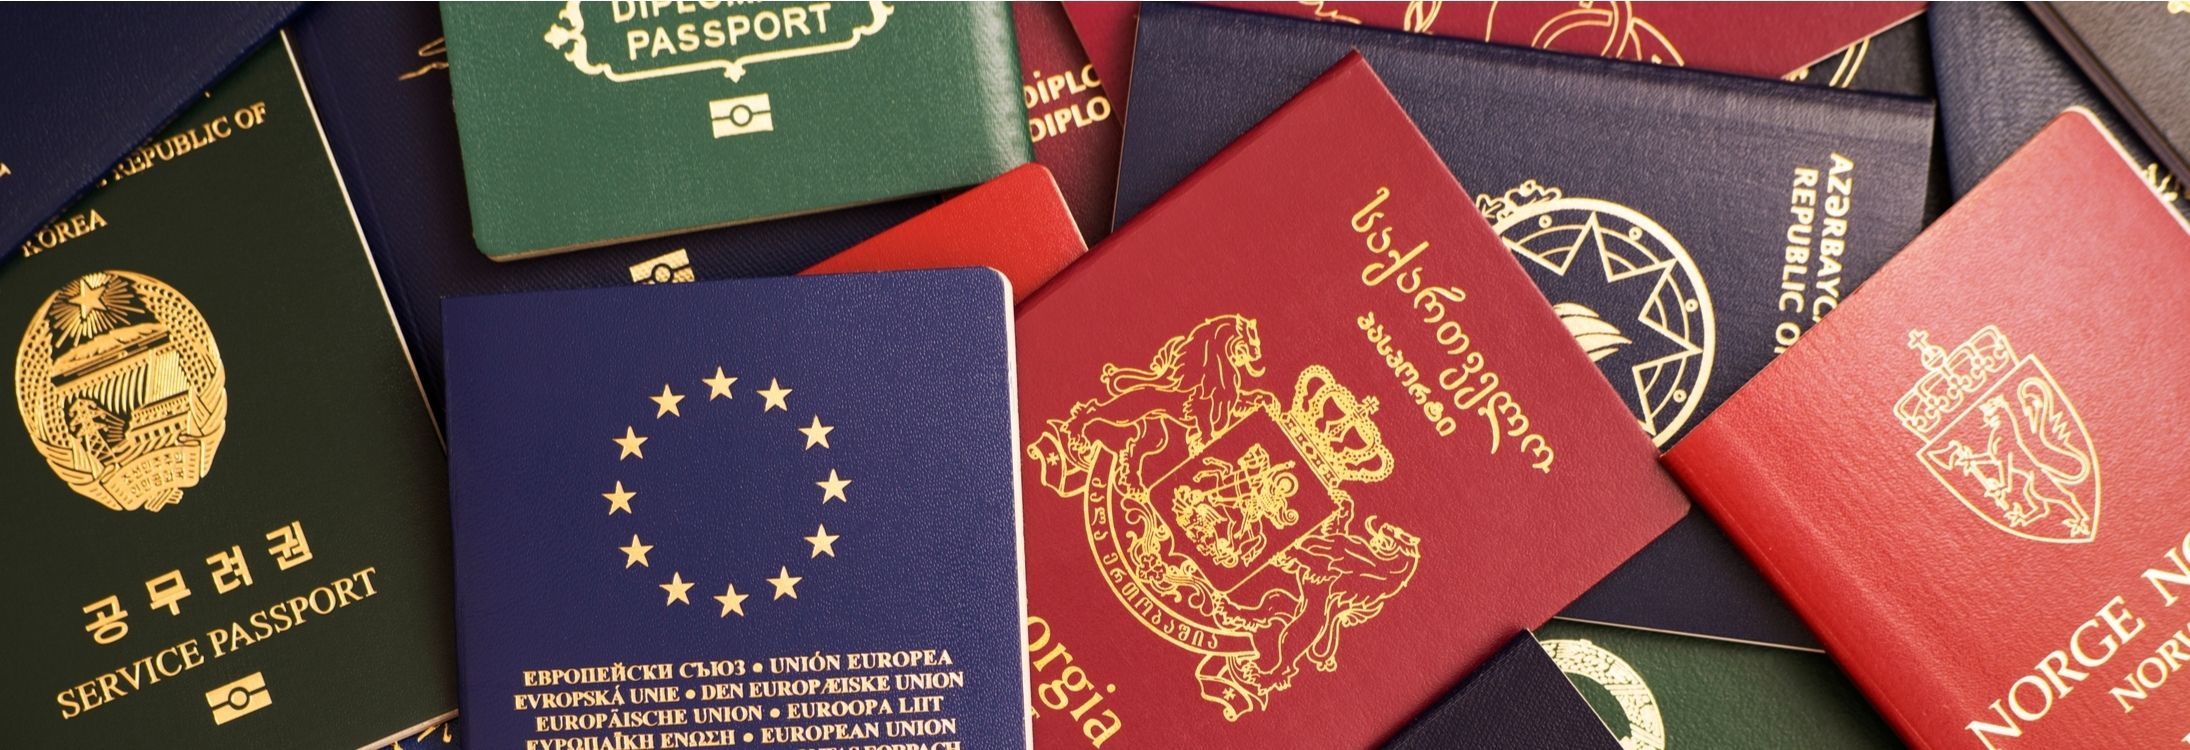 World's Most Powerful Passports in 2020